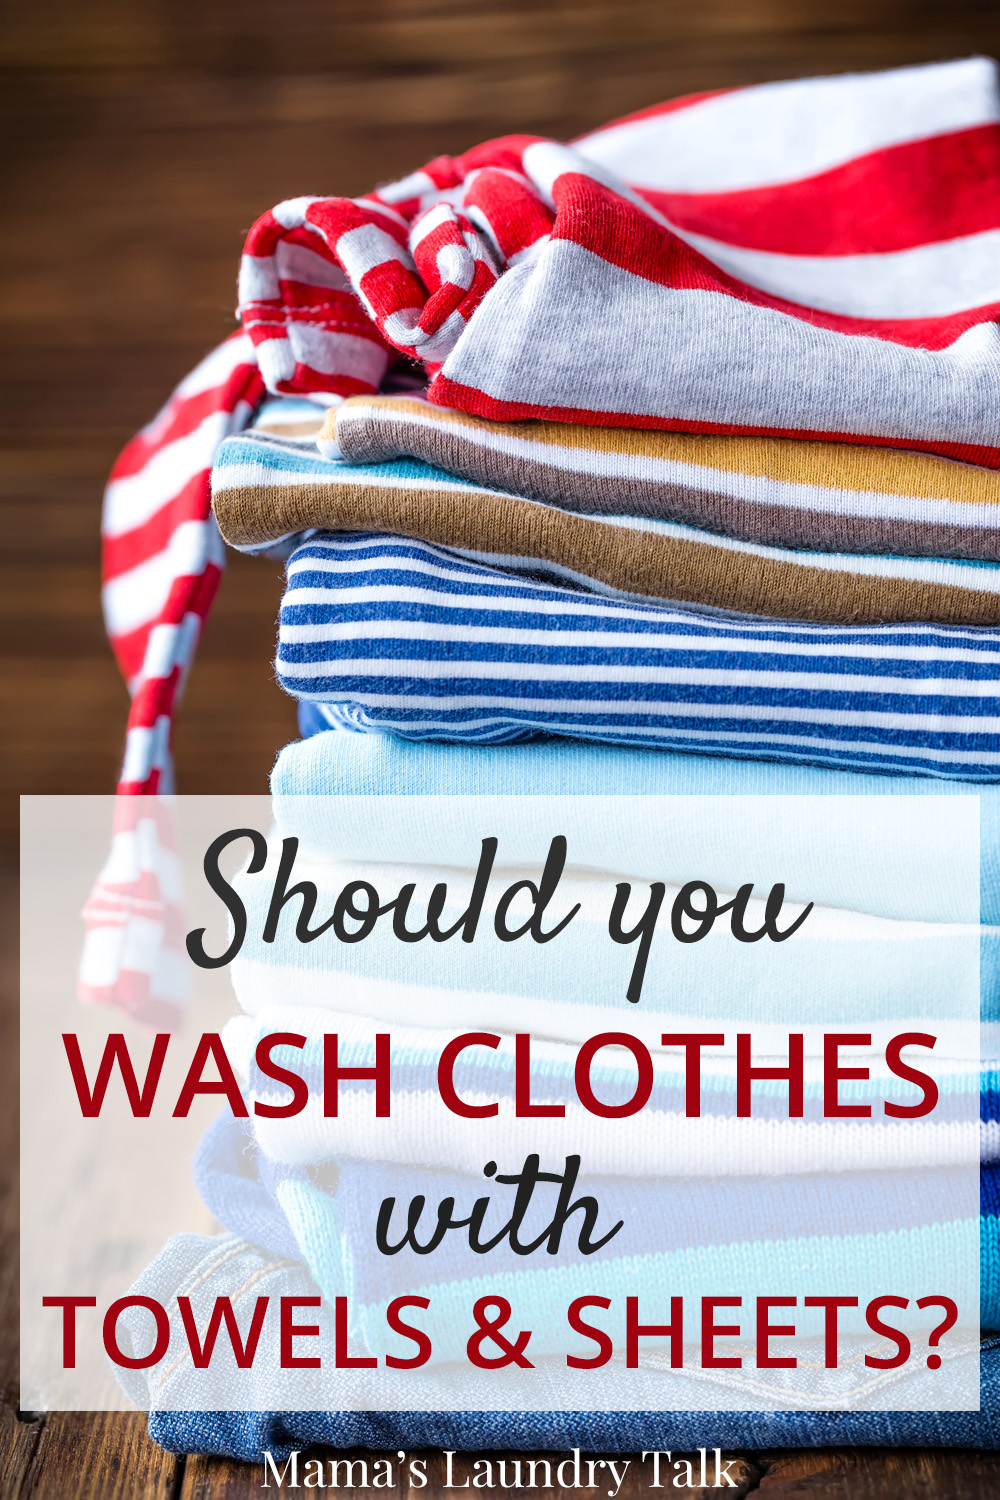 http://www.mamaslaundrytalk.com/wp-content/uploads/2017/12/Should-you-wash-clothes-with-towels-and-sheets.jpg